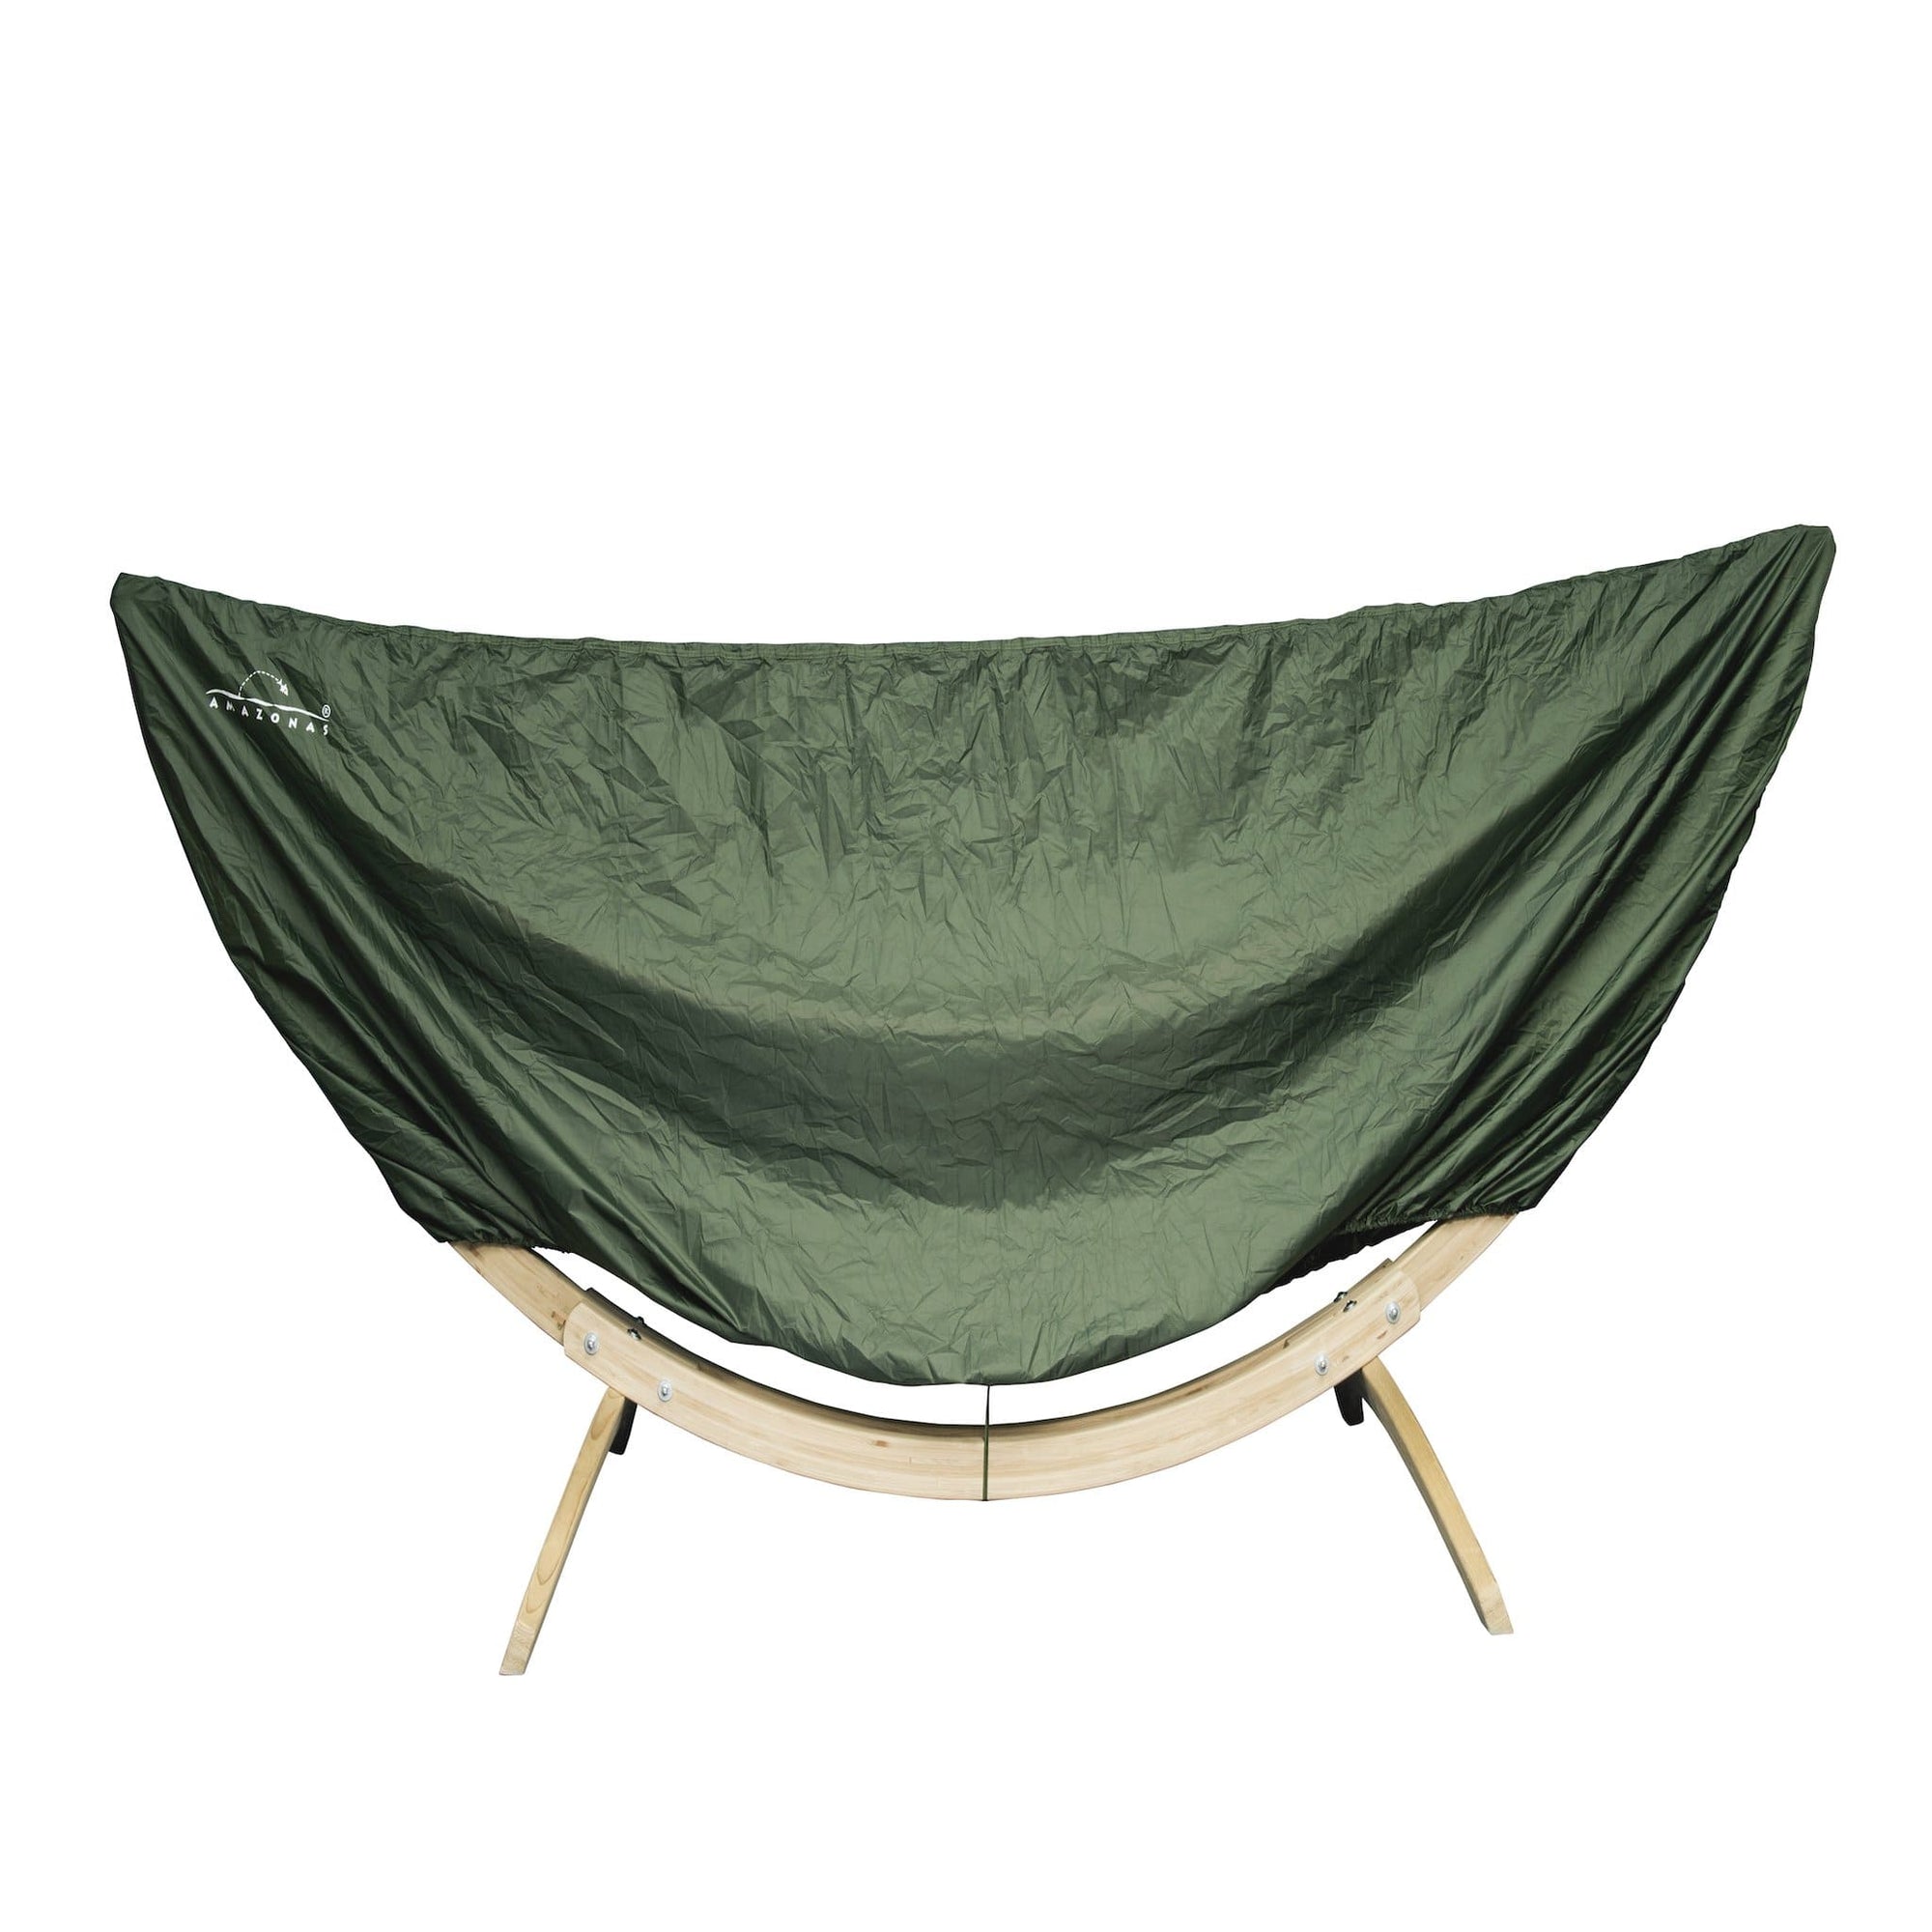 Hammock and stand cover